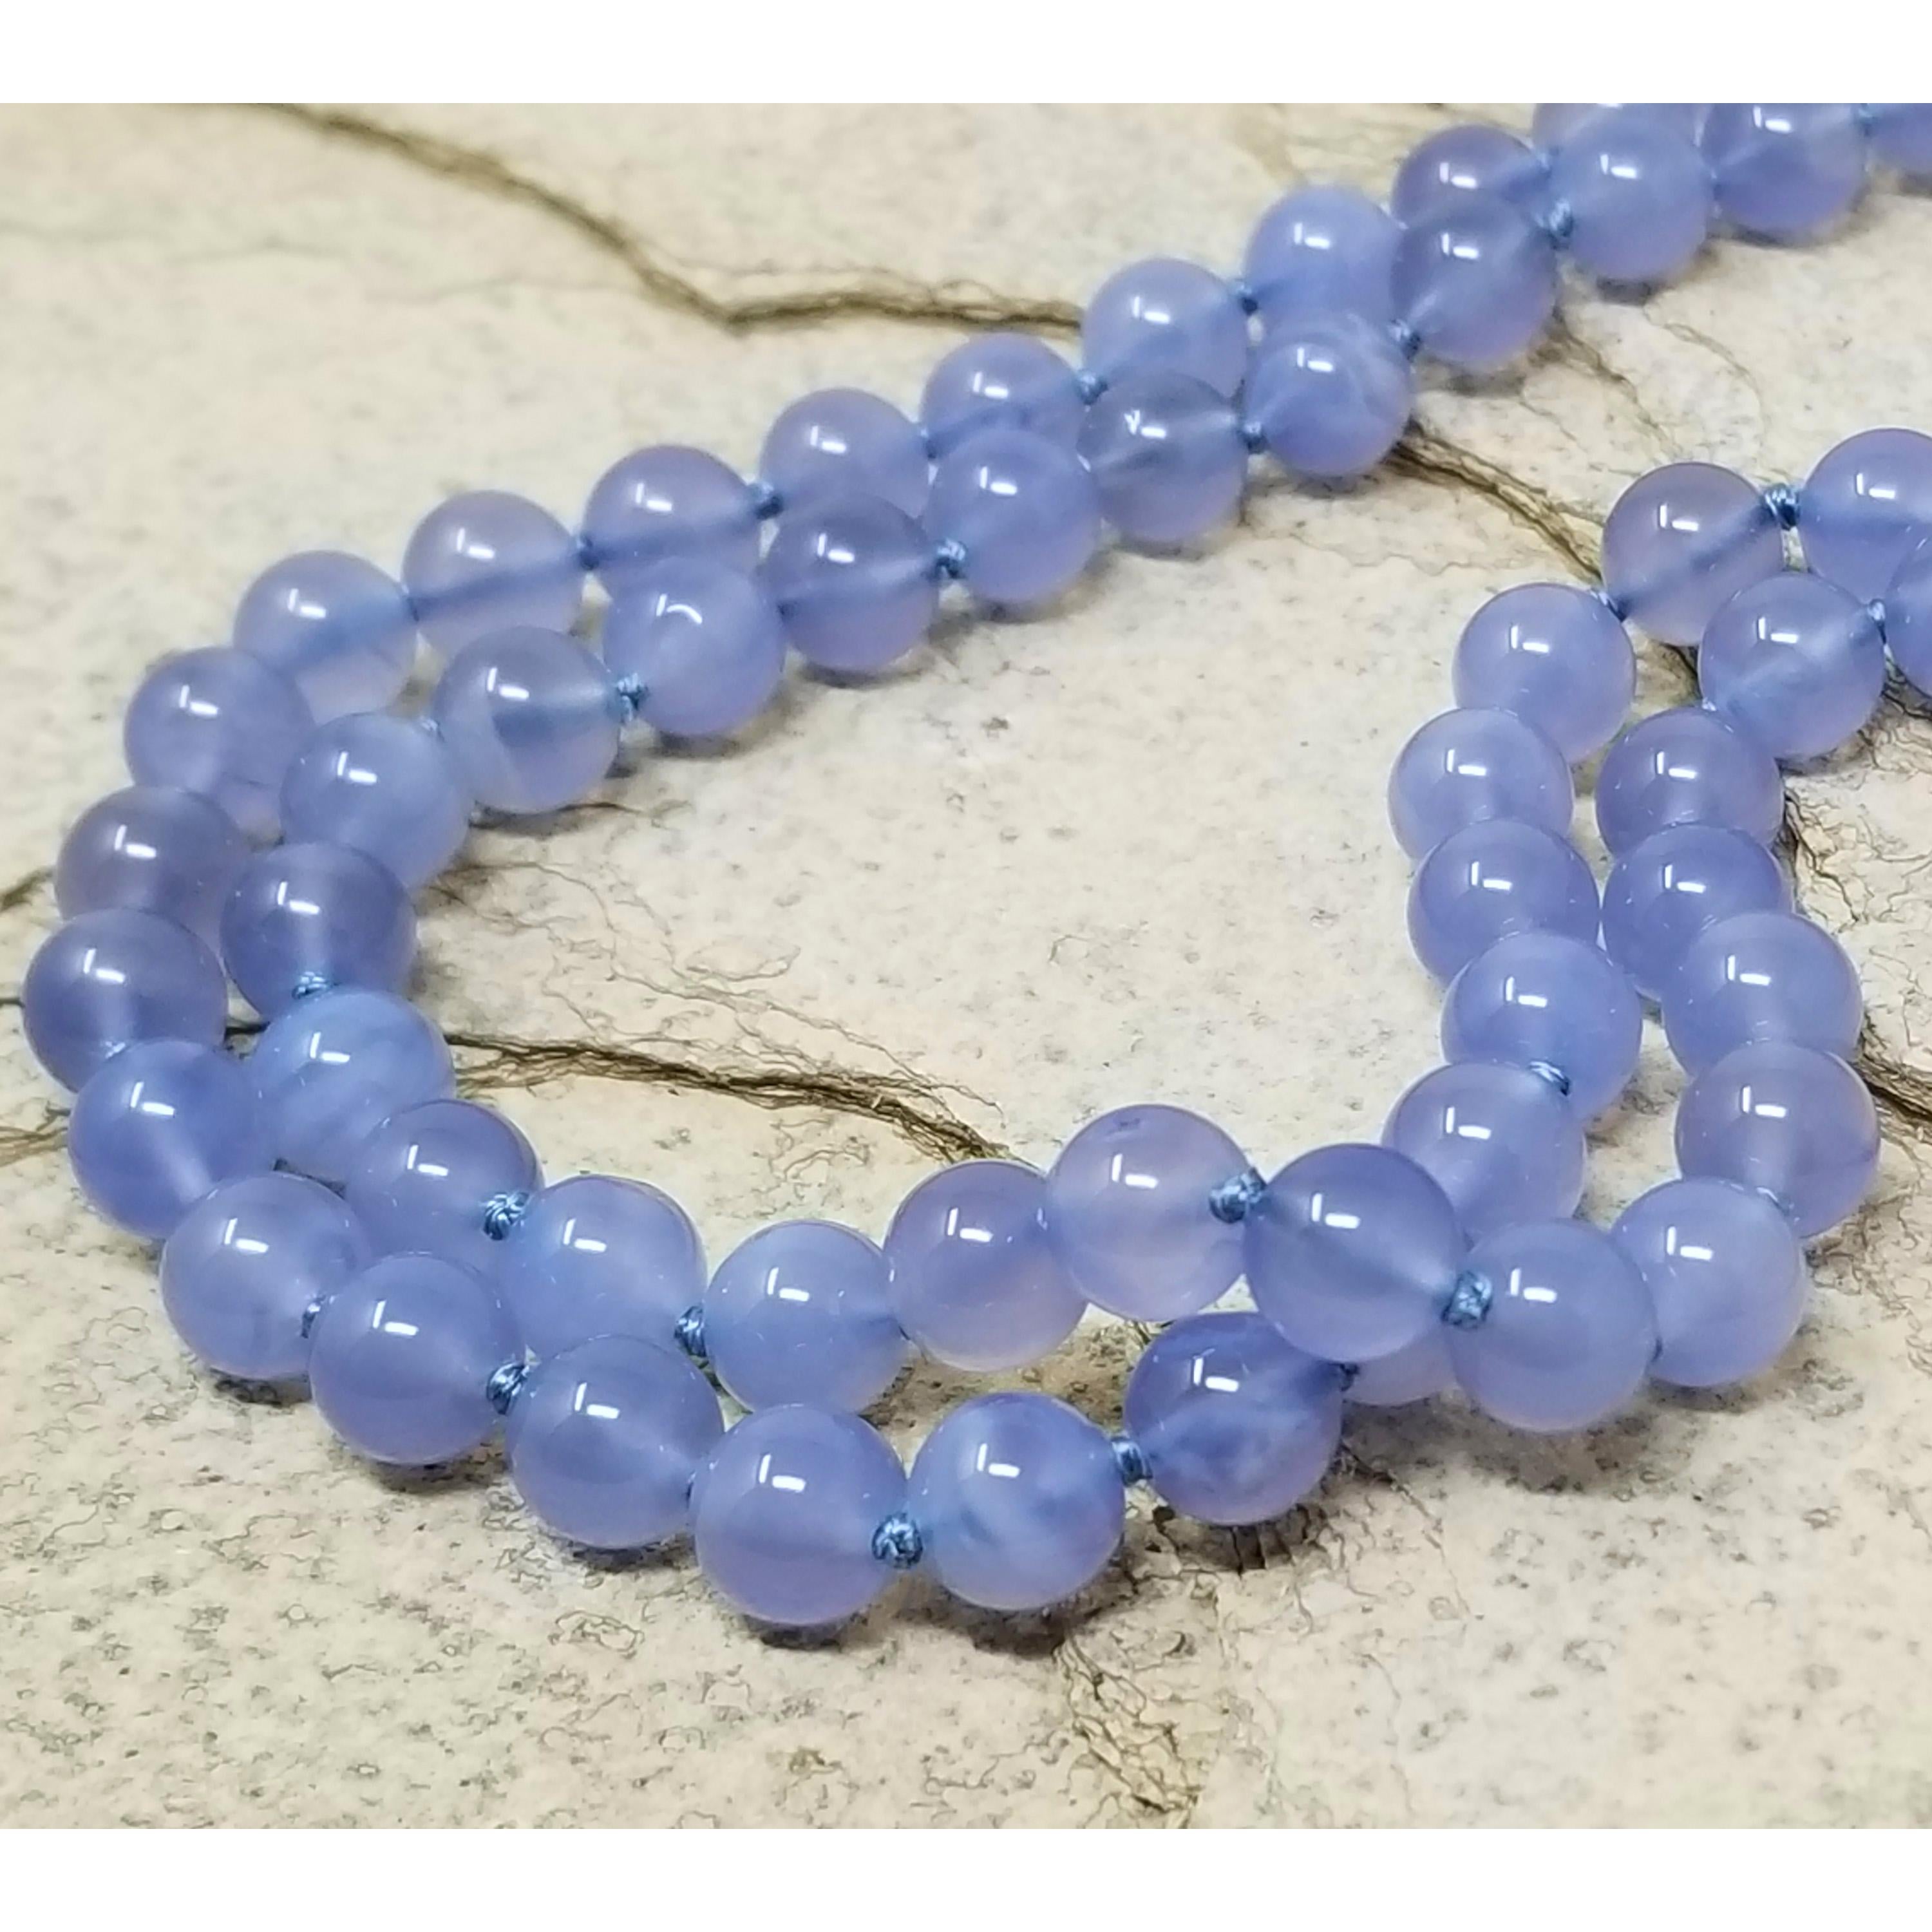 This double strand gemstone beaded necklace features fine lavender blue, perfectly matched chalcedony beads. These gemstones glow with exquisite translucence.

The two strands nest perfectly together for extra impact, and they are finished with